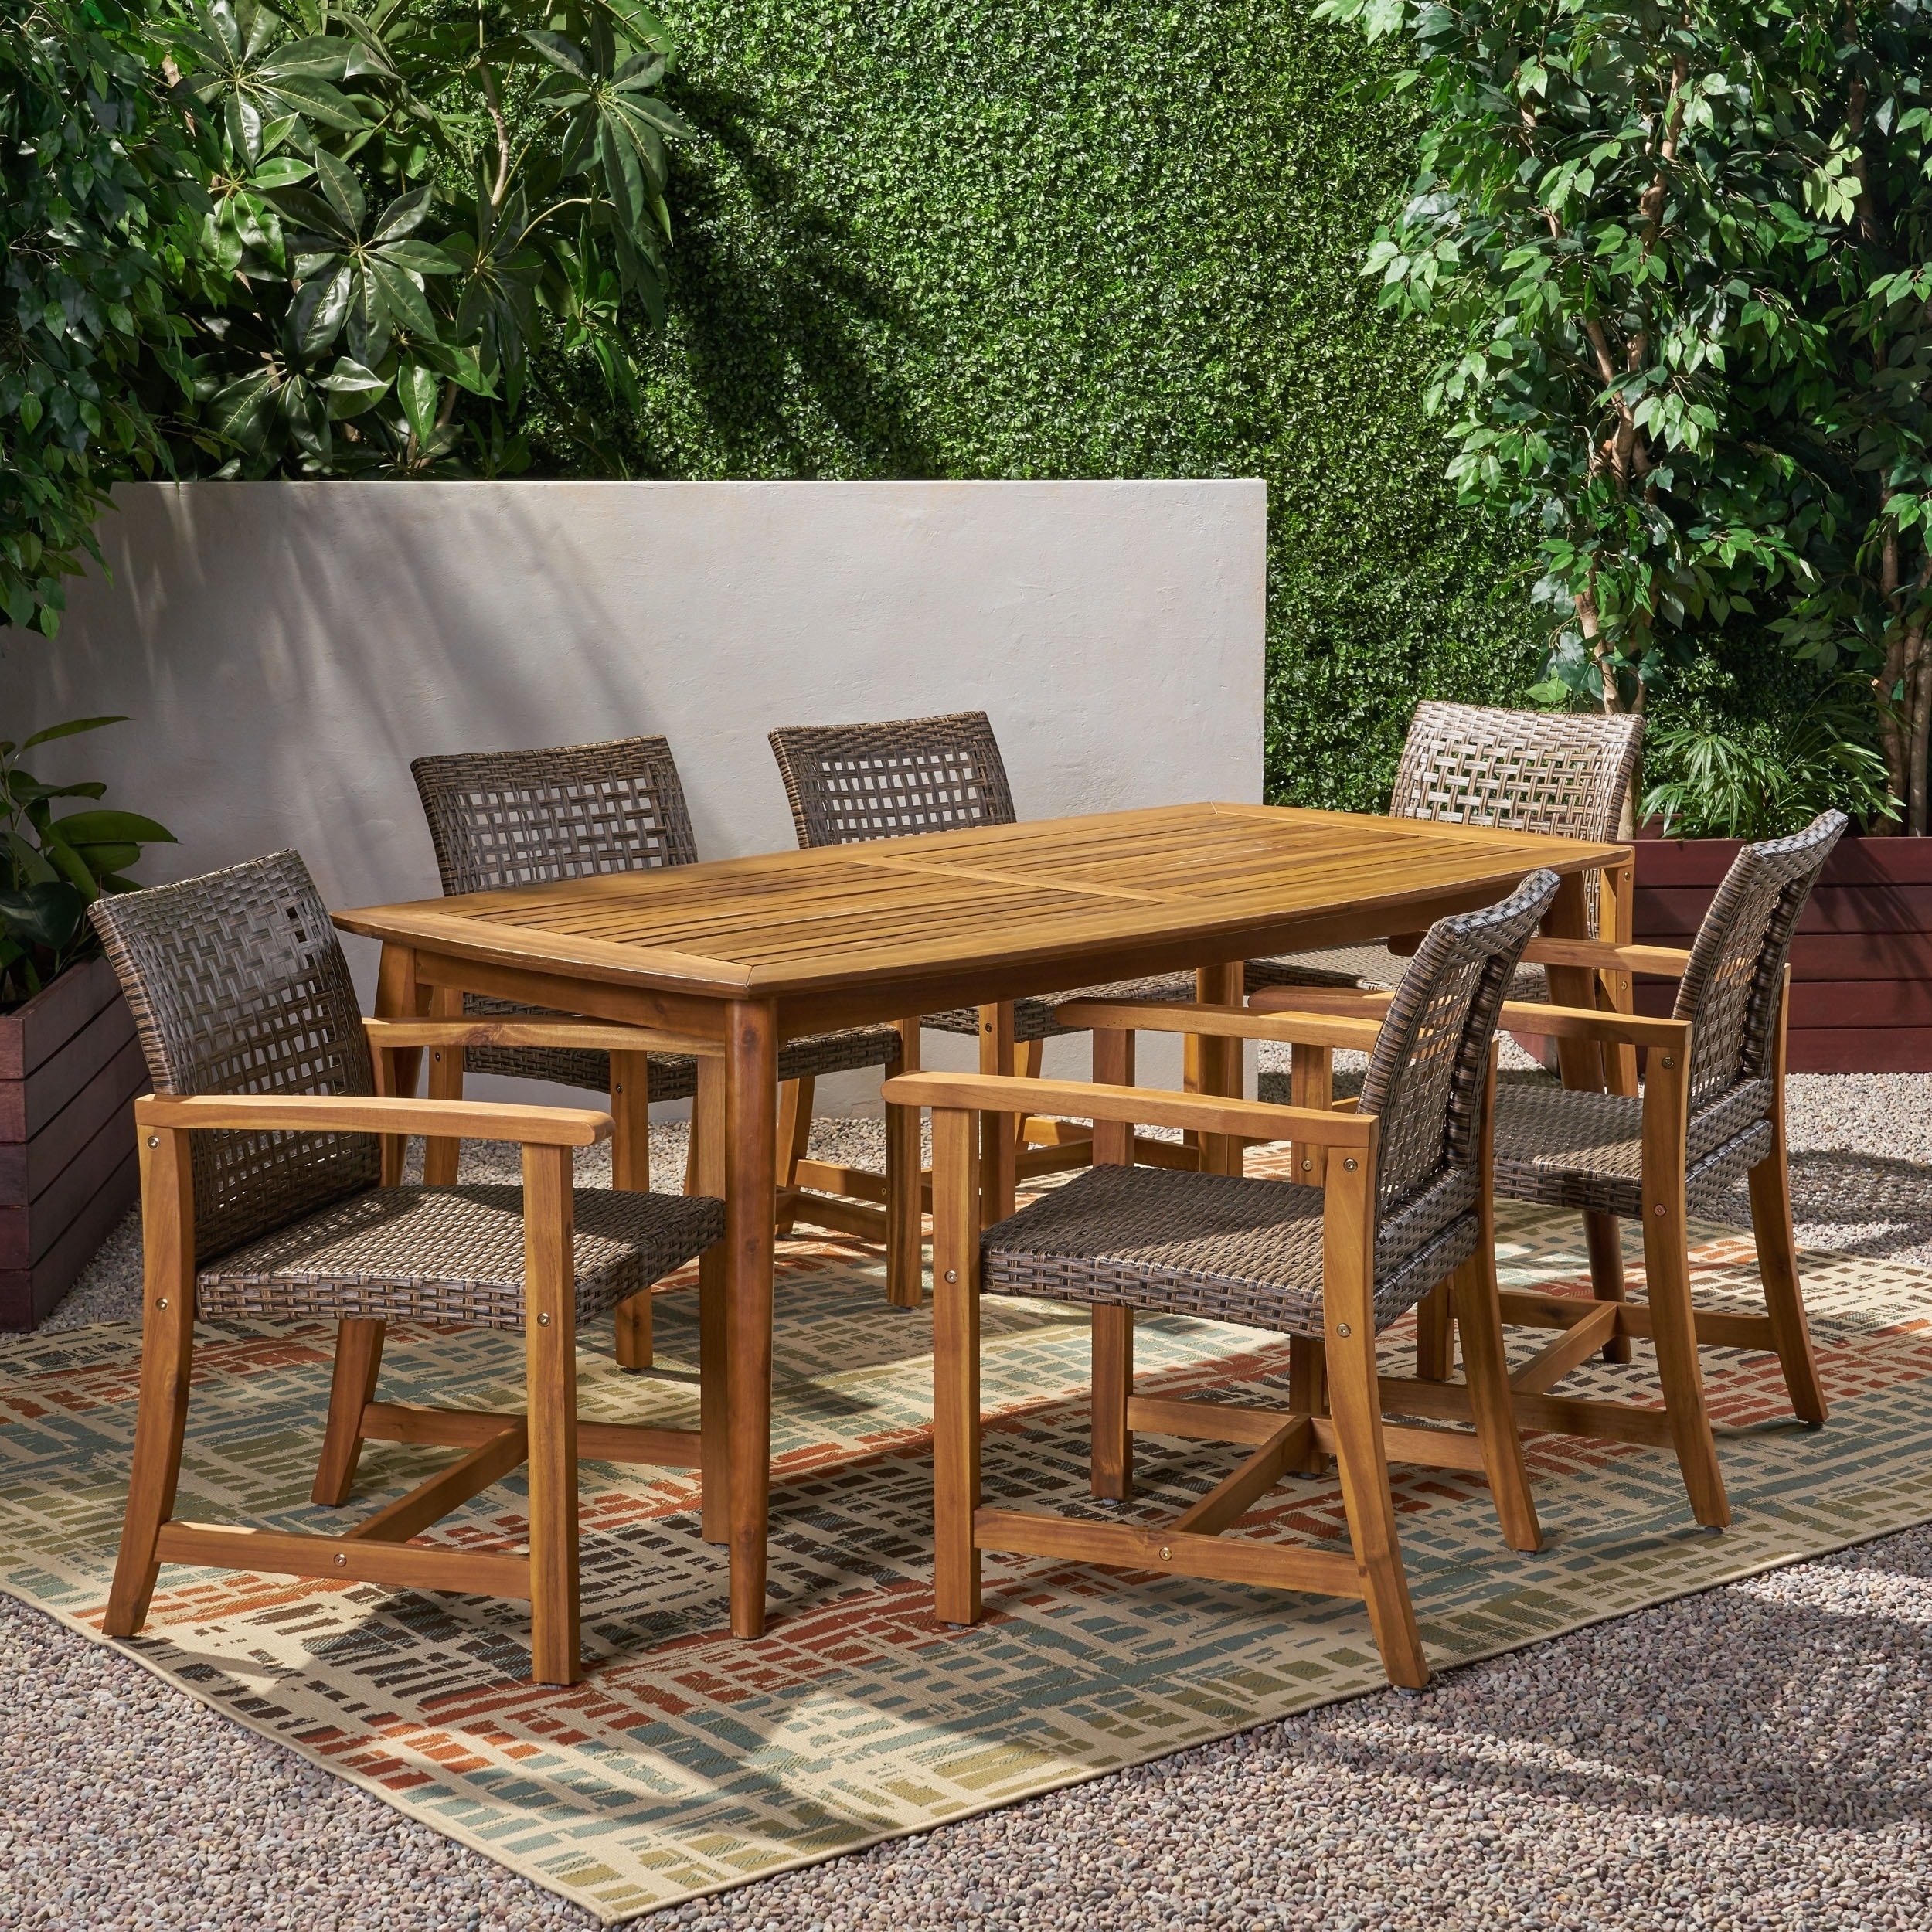 Botsford Outdoor 6 Seater Acacia Wood Dining Set By Christopher Knight Home